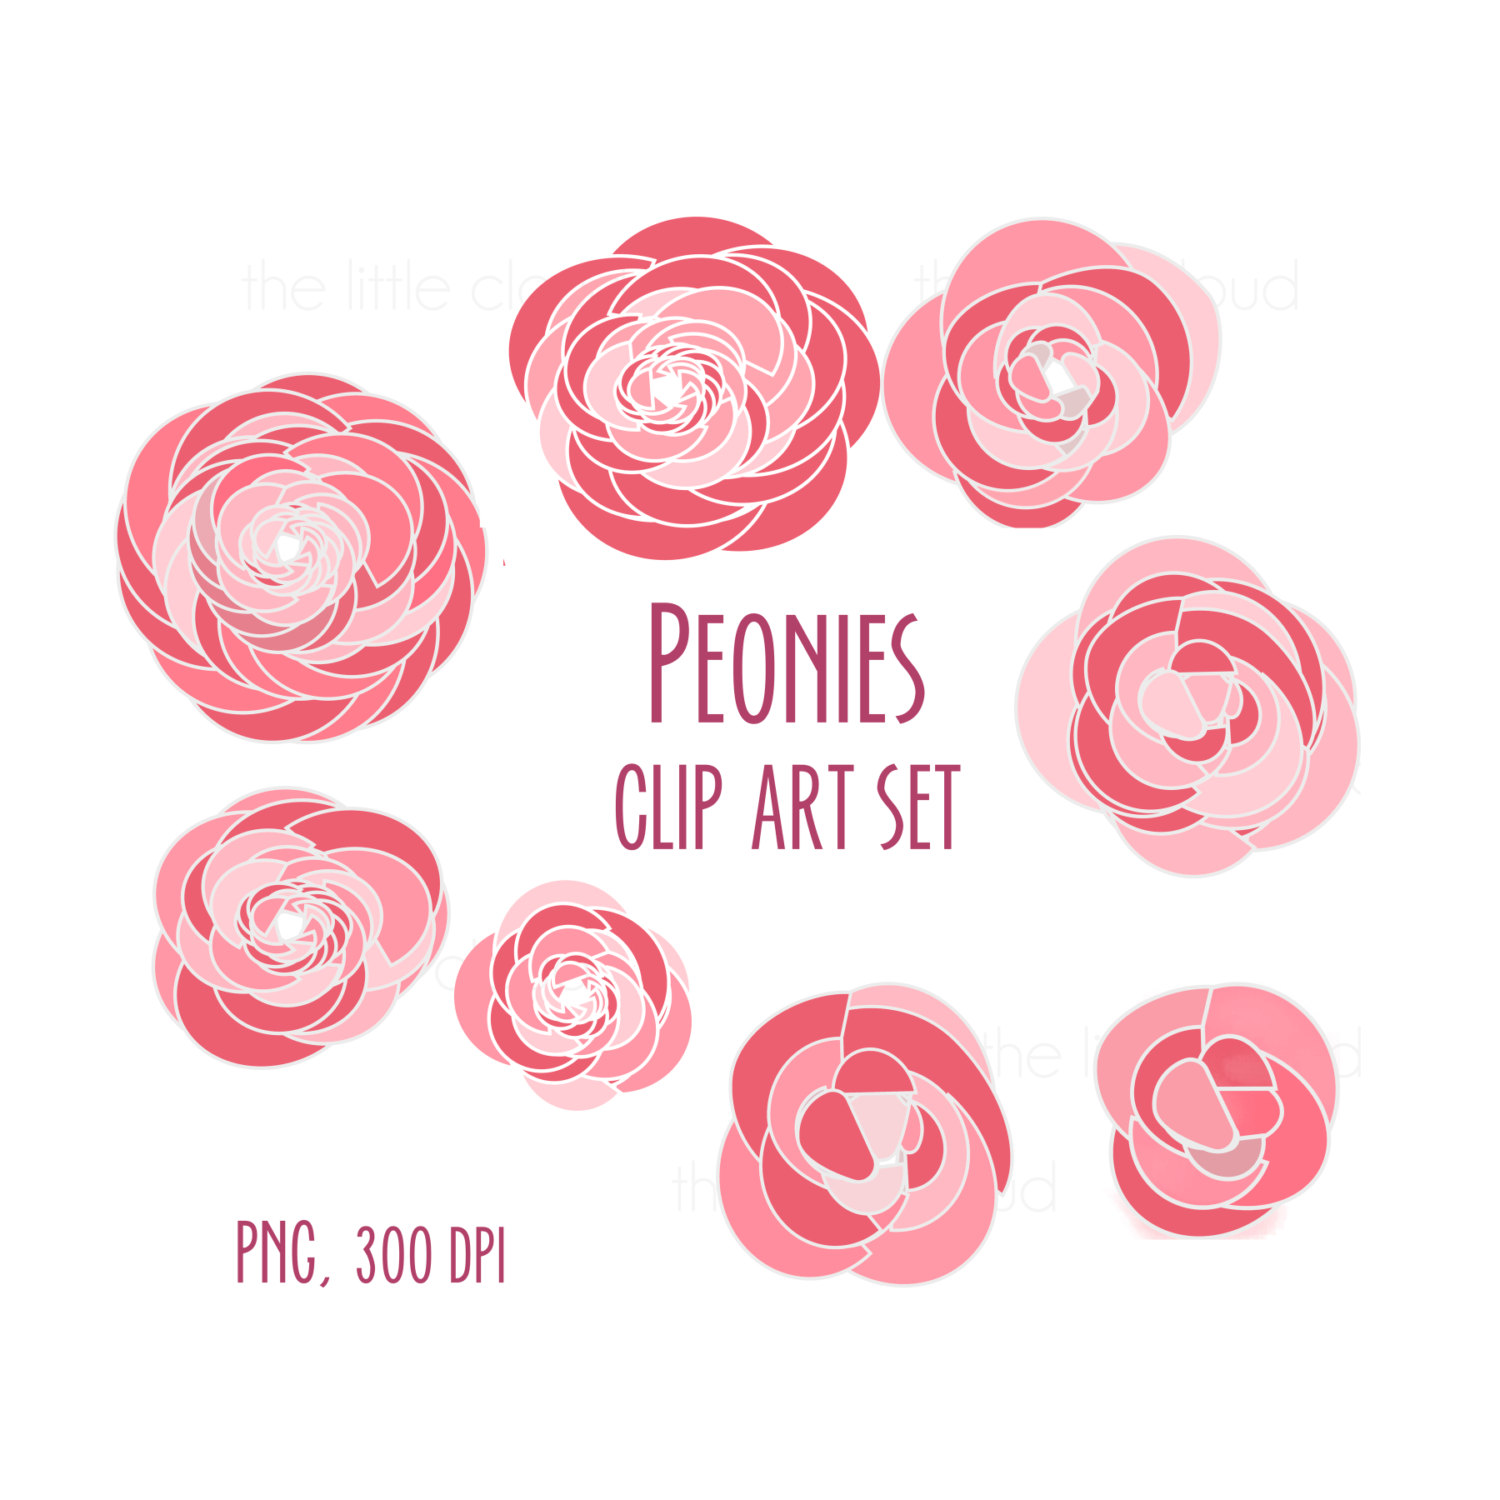 Peonies Clip Art Pink And Red Flowers Clip Art By Thelittleclouddd